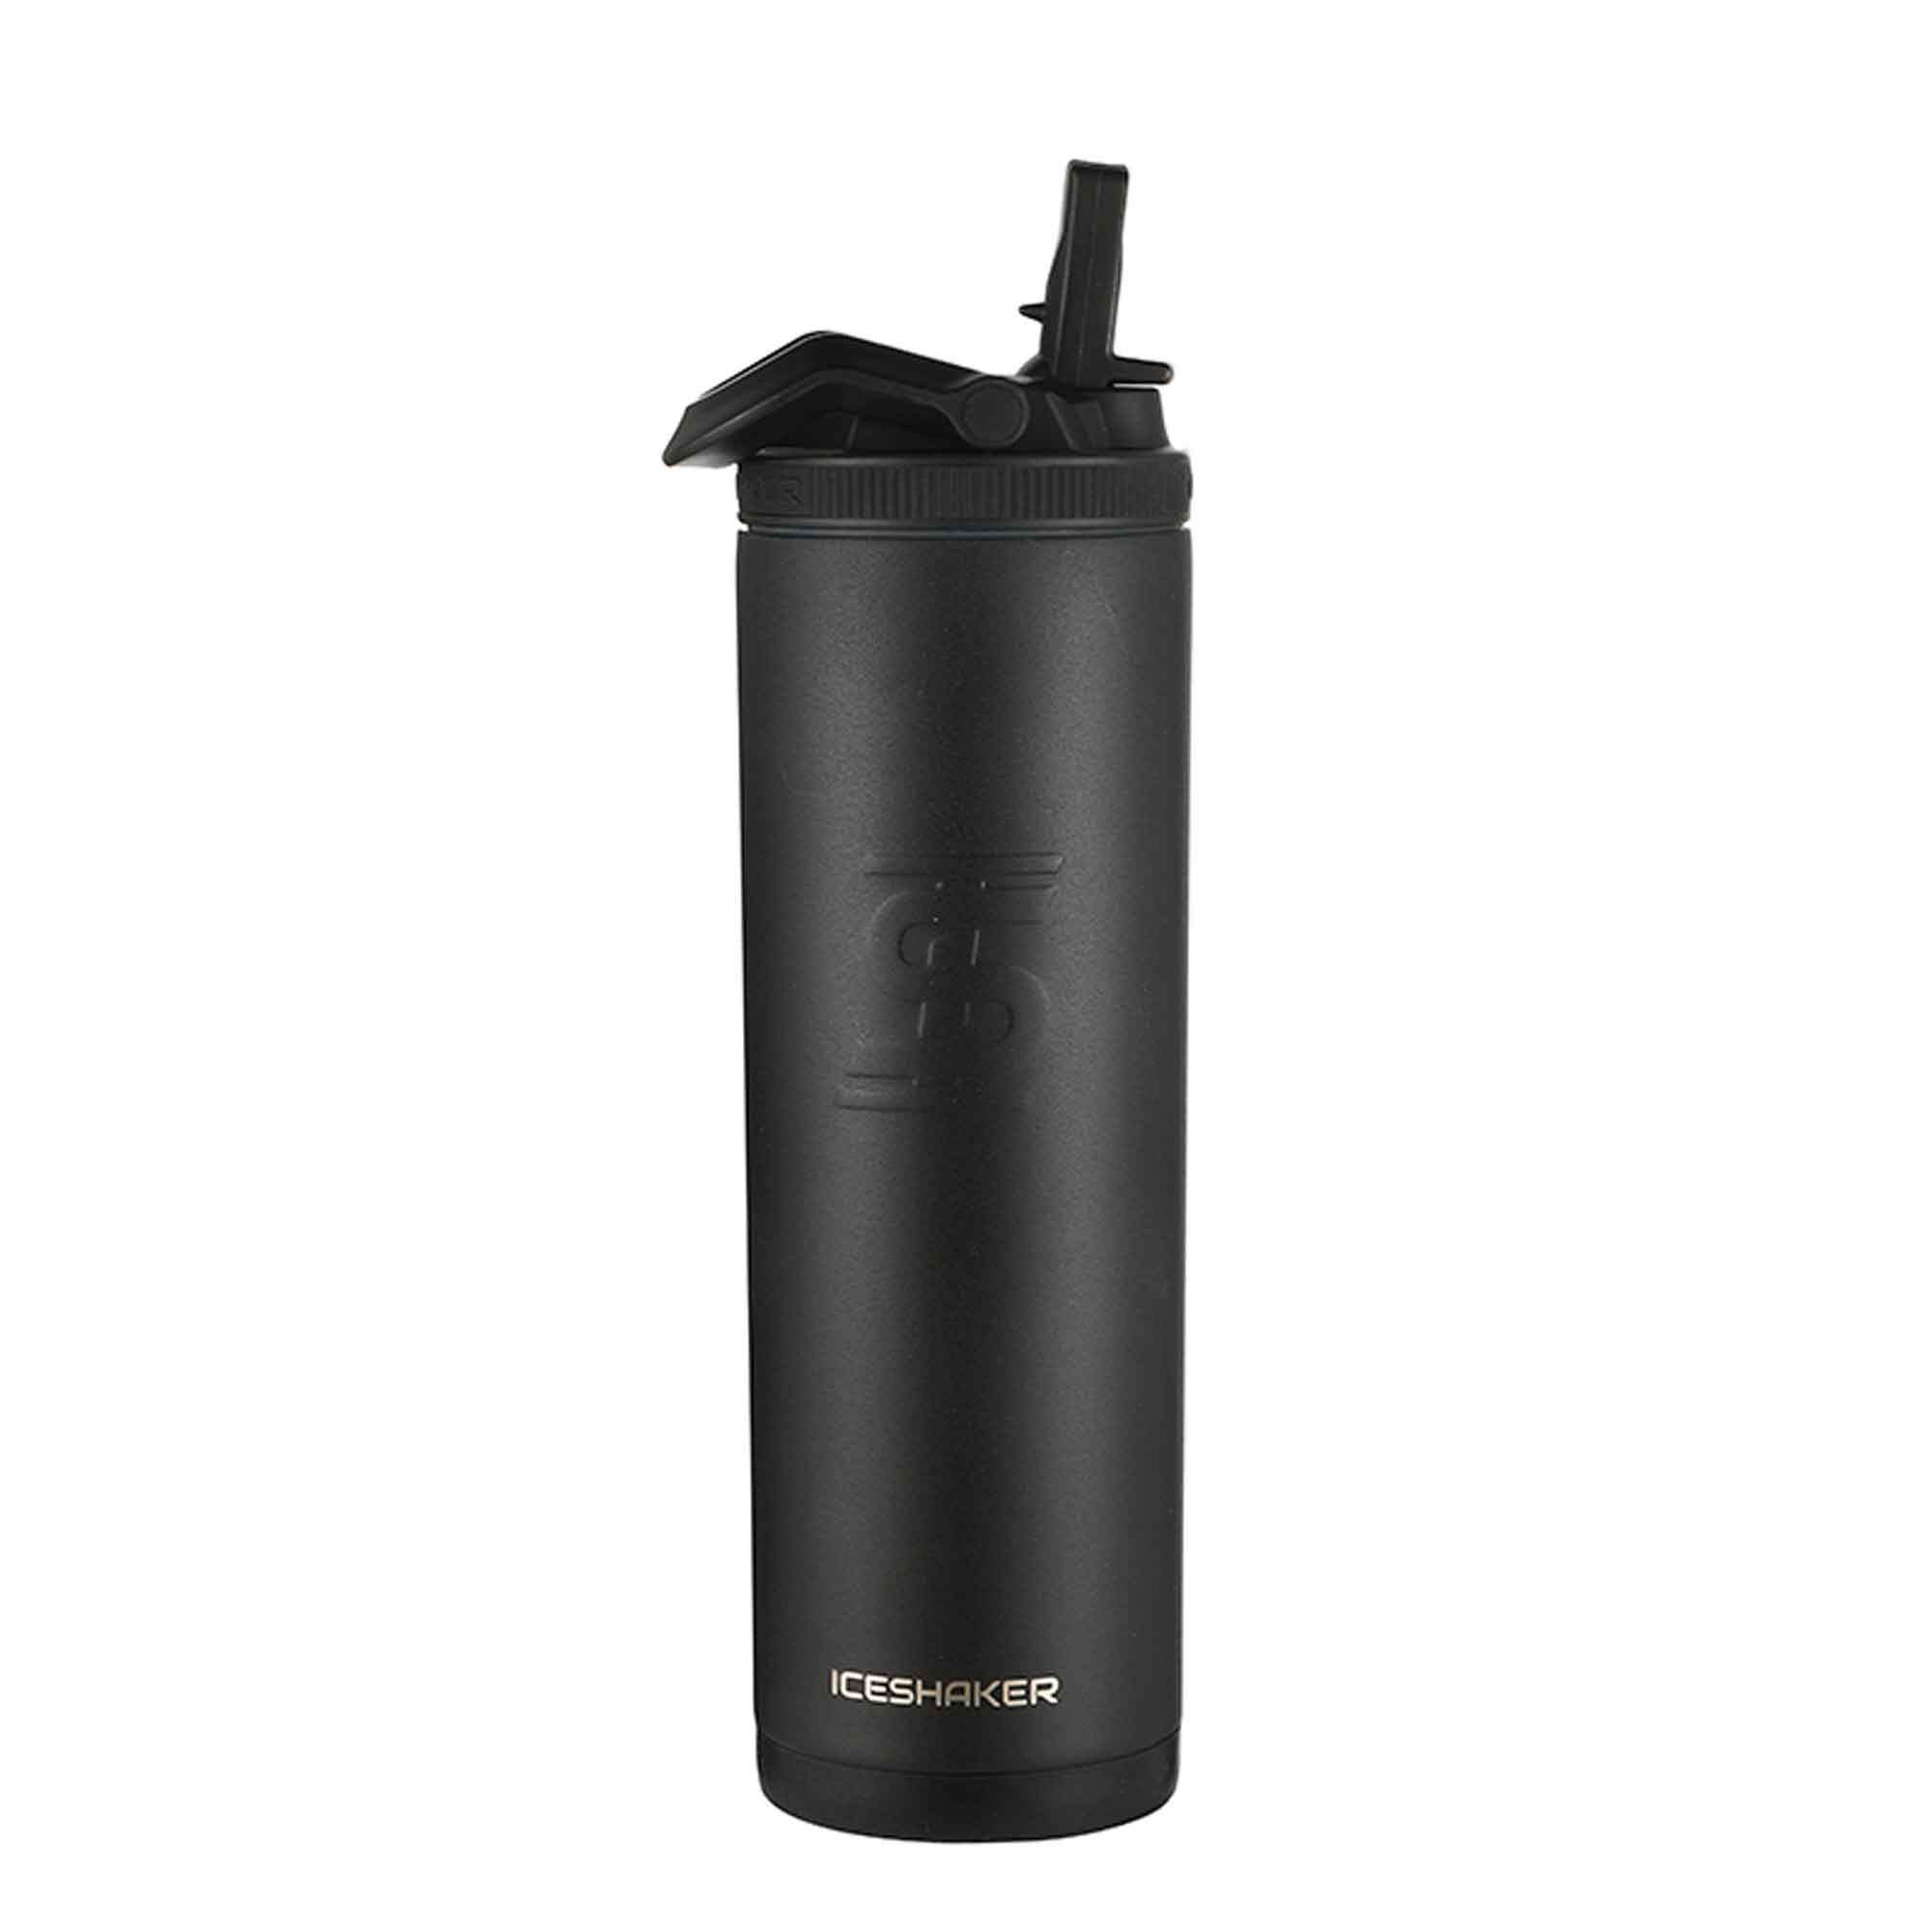 TAL Stainless Steel Water Bottle, 20 fluid ounces, India